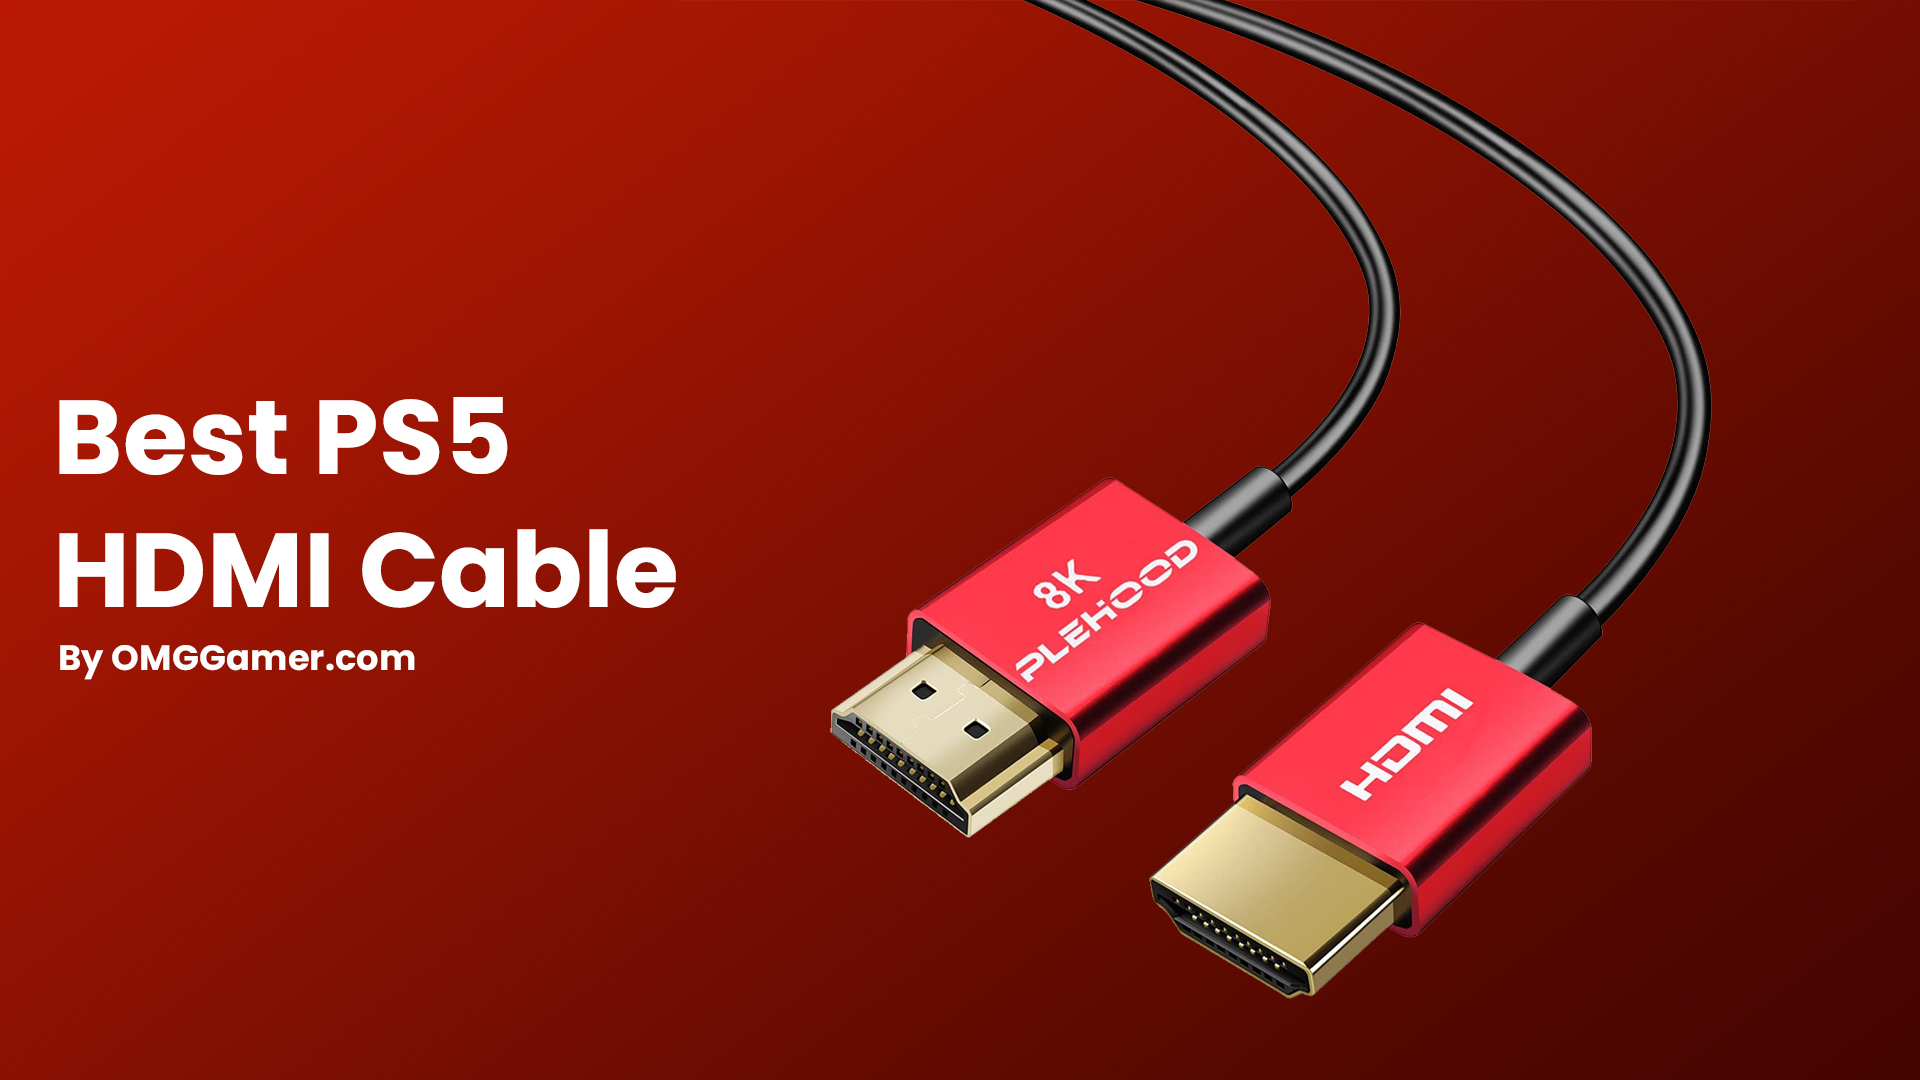 Best PS5 HDMI Cable [Gamers Choice]